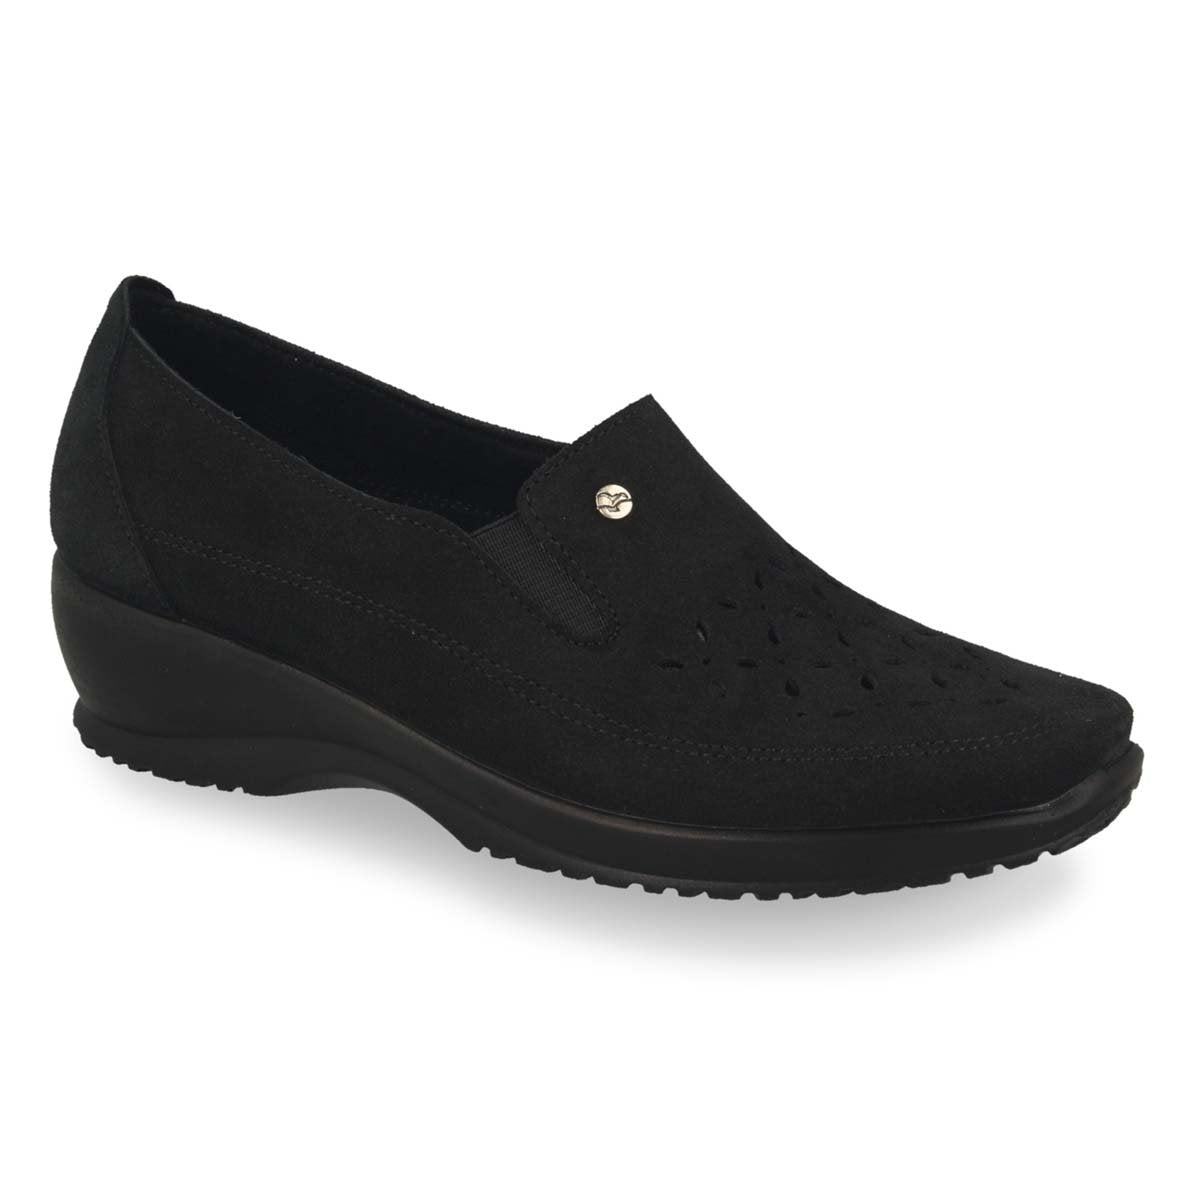 Photo of the Leather Woman Shoe Black (17d97sq)